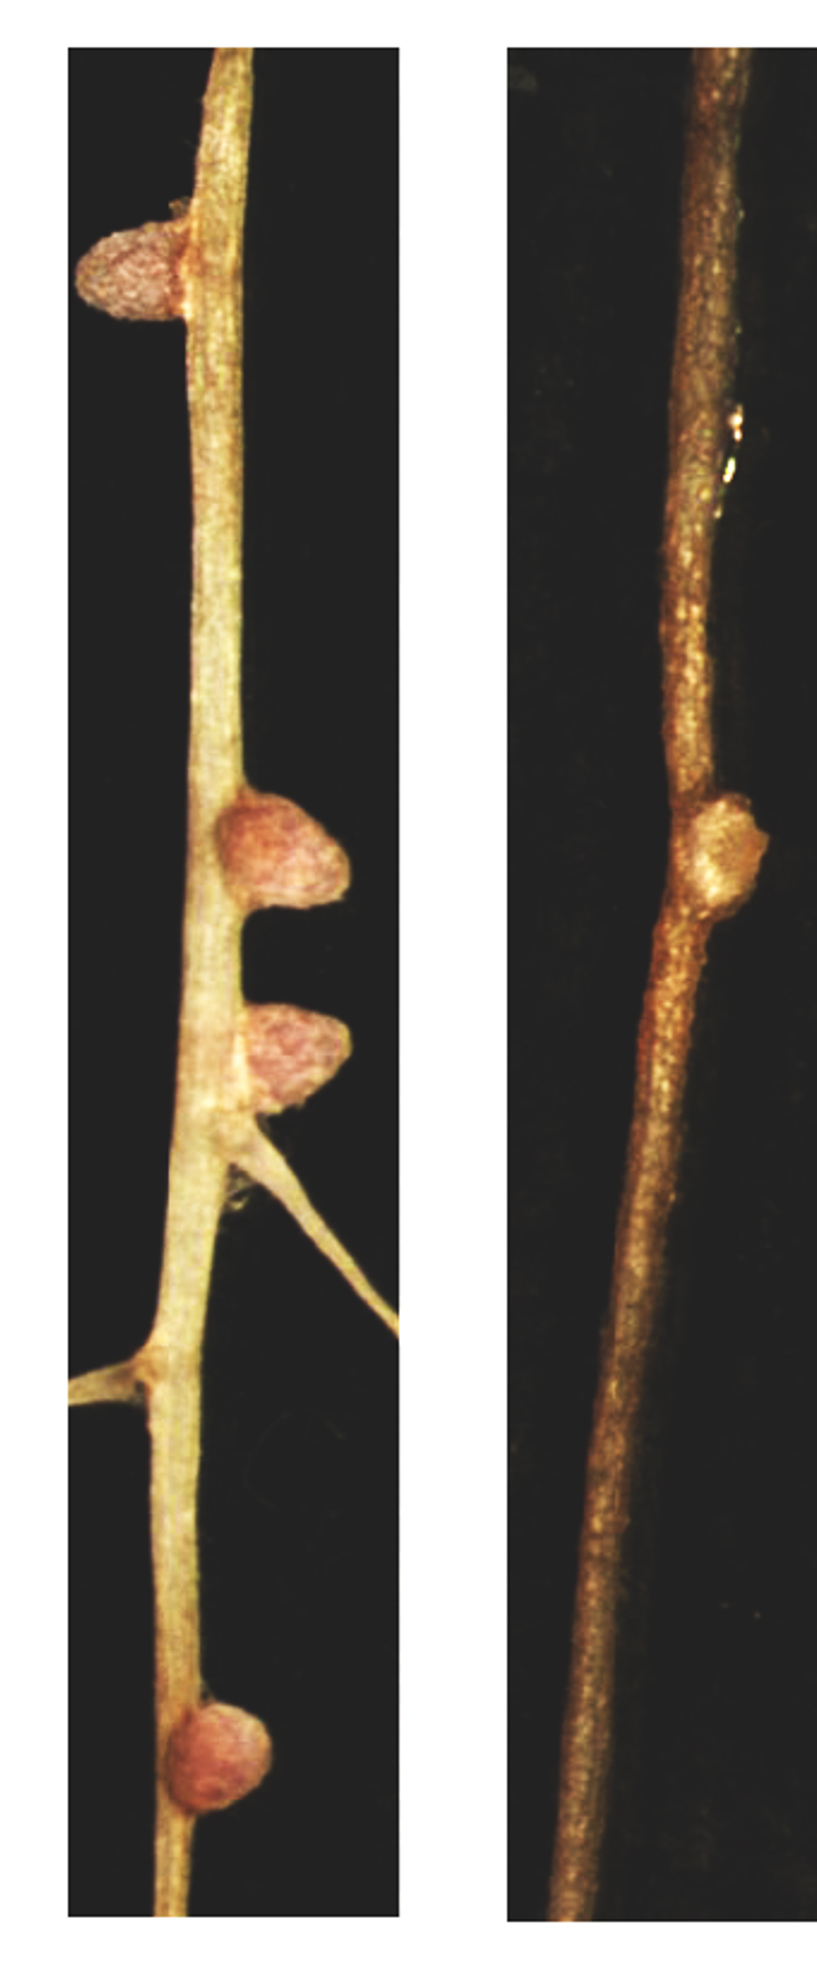 nodules in unstressed plants and saltstressed plants.jpg